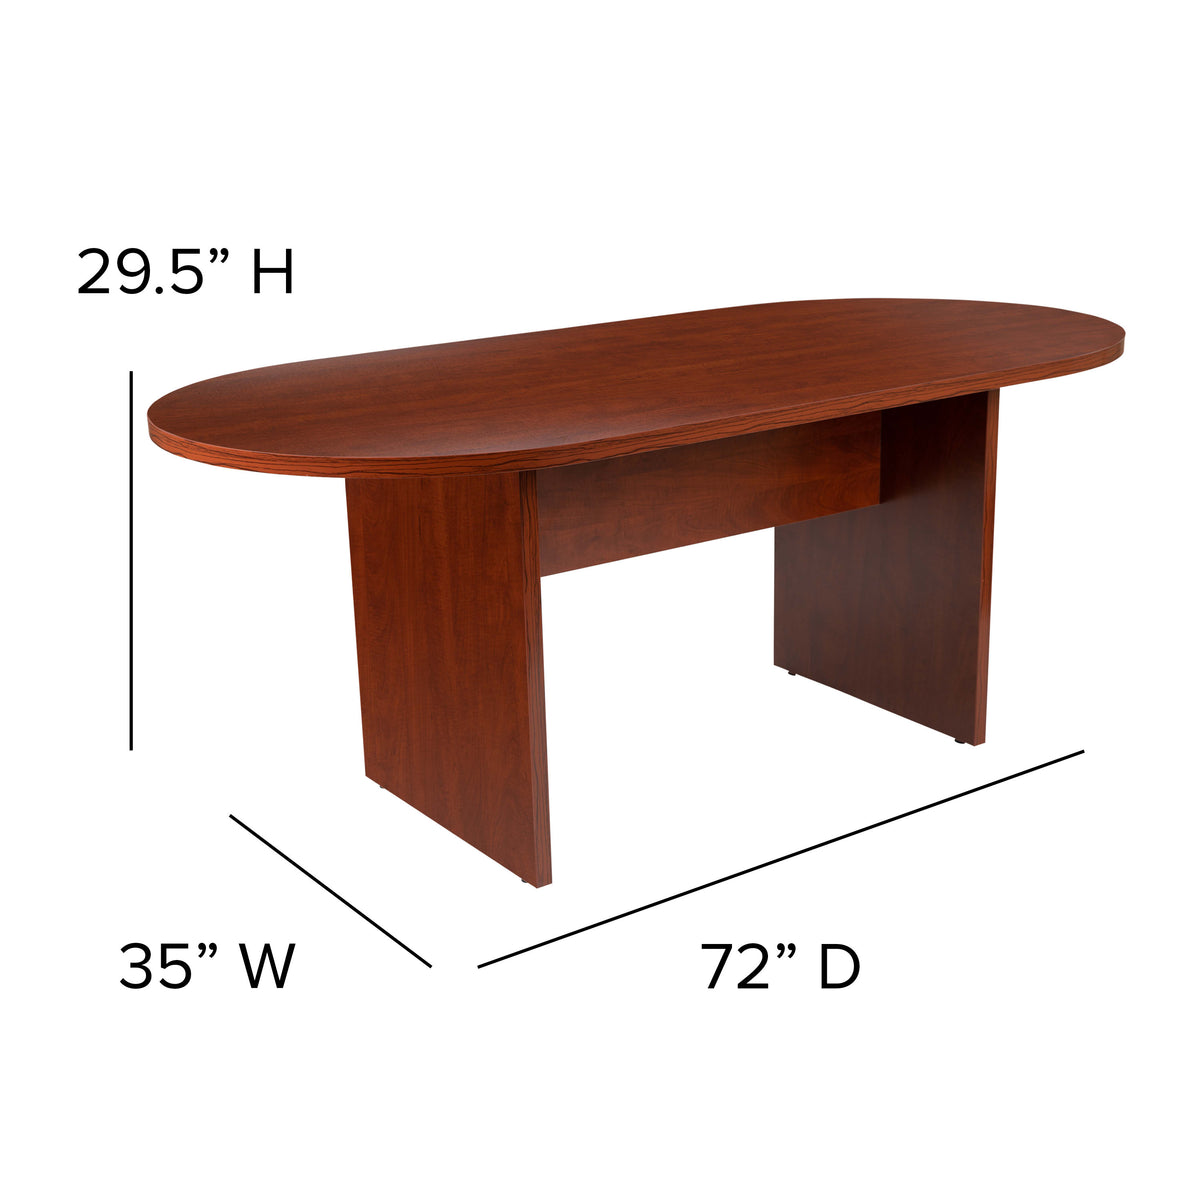 Cherry |#| 6 Foot (72 inch) Classic Oval Conference Table in Cherry - Meeting Table